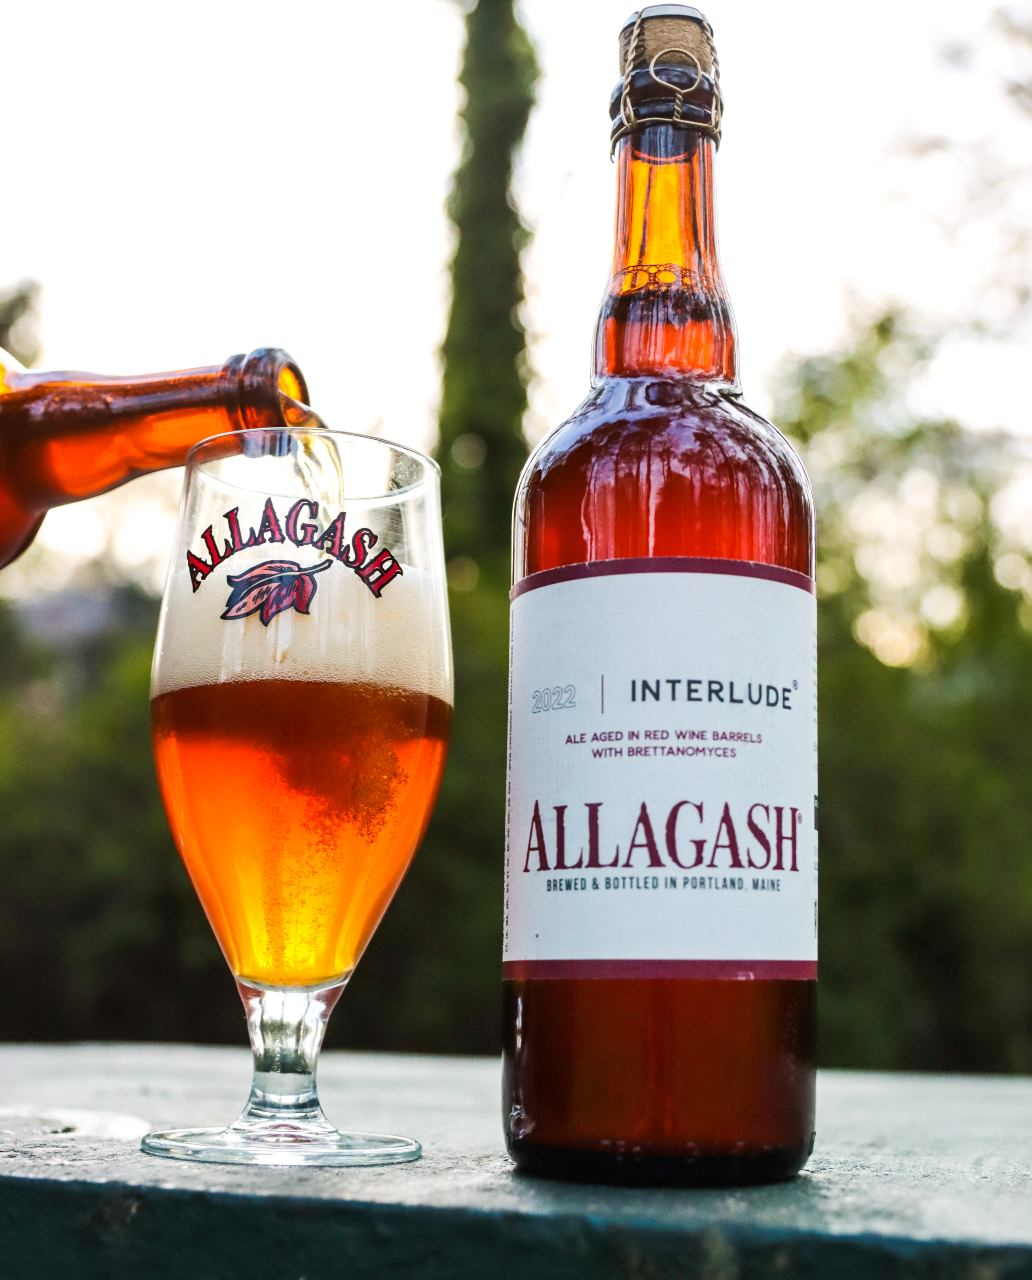 Allagash Interlude being poured into a chalice